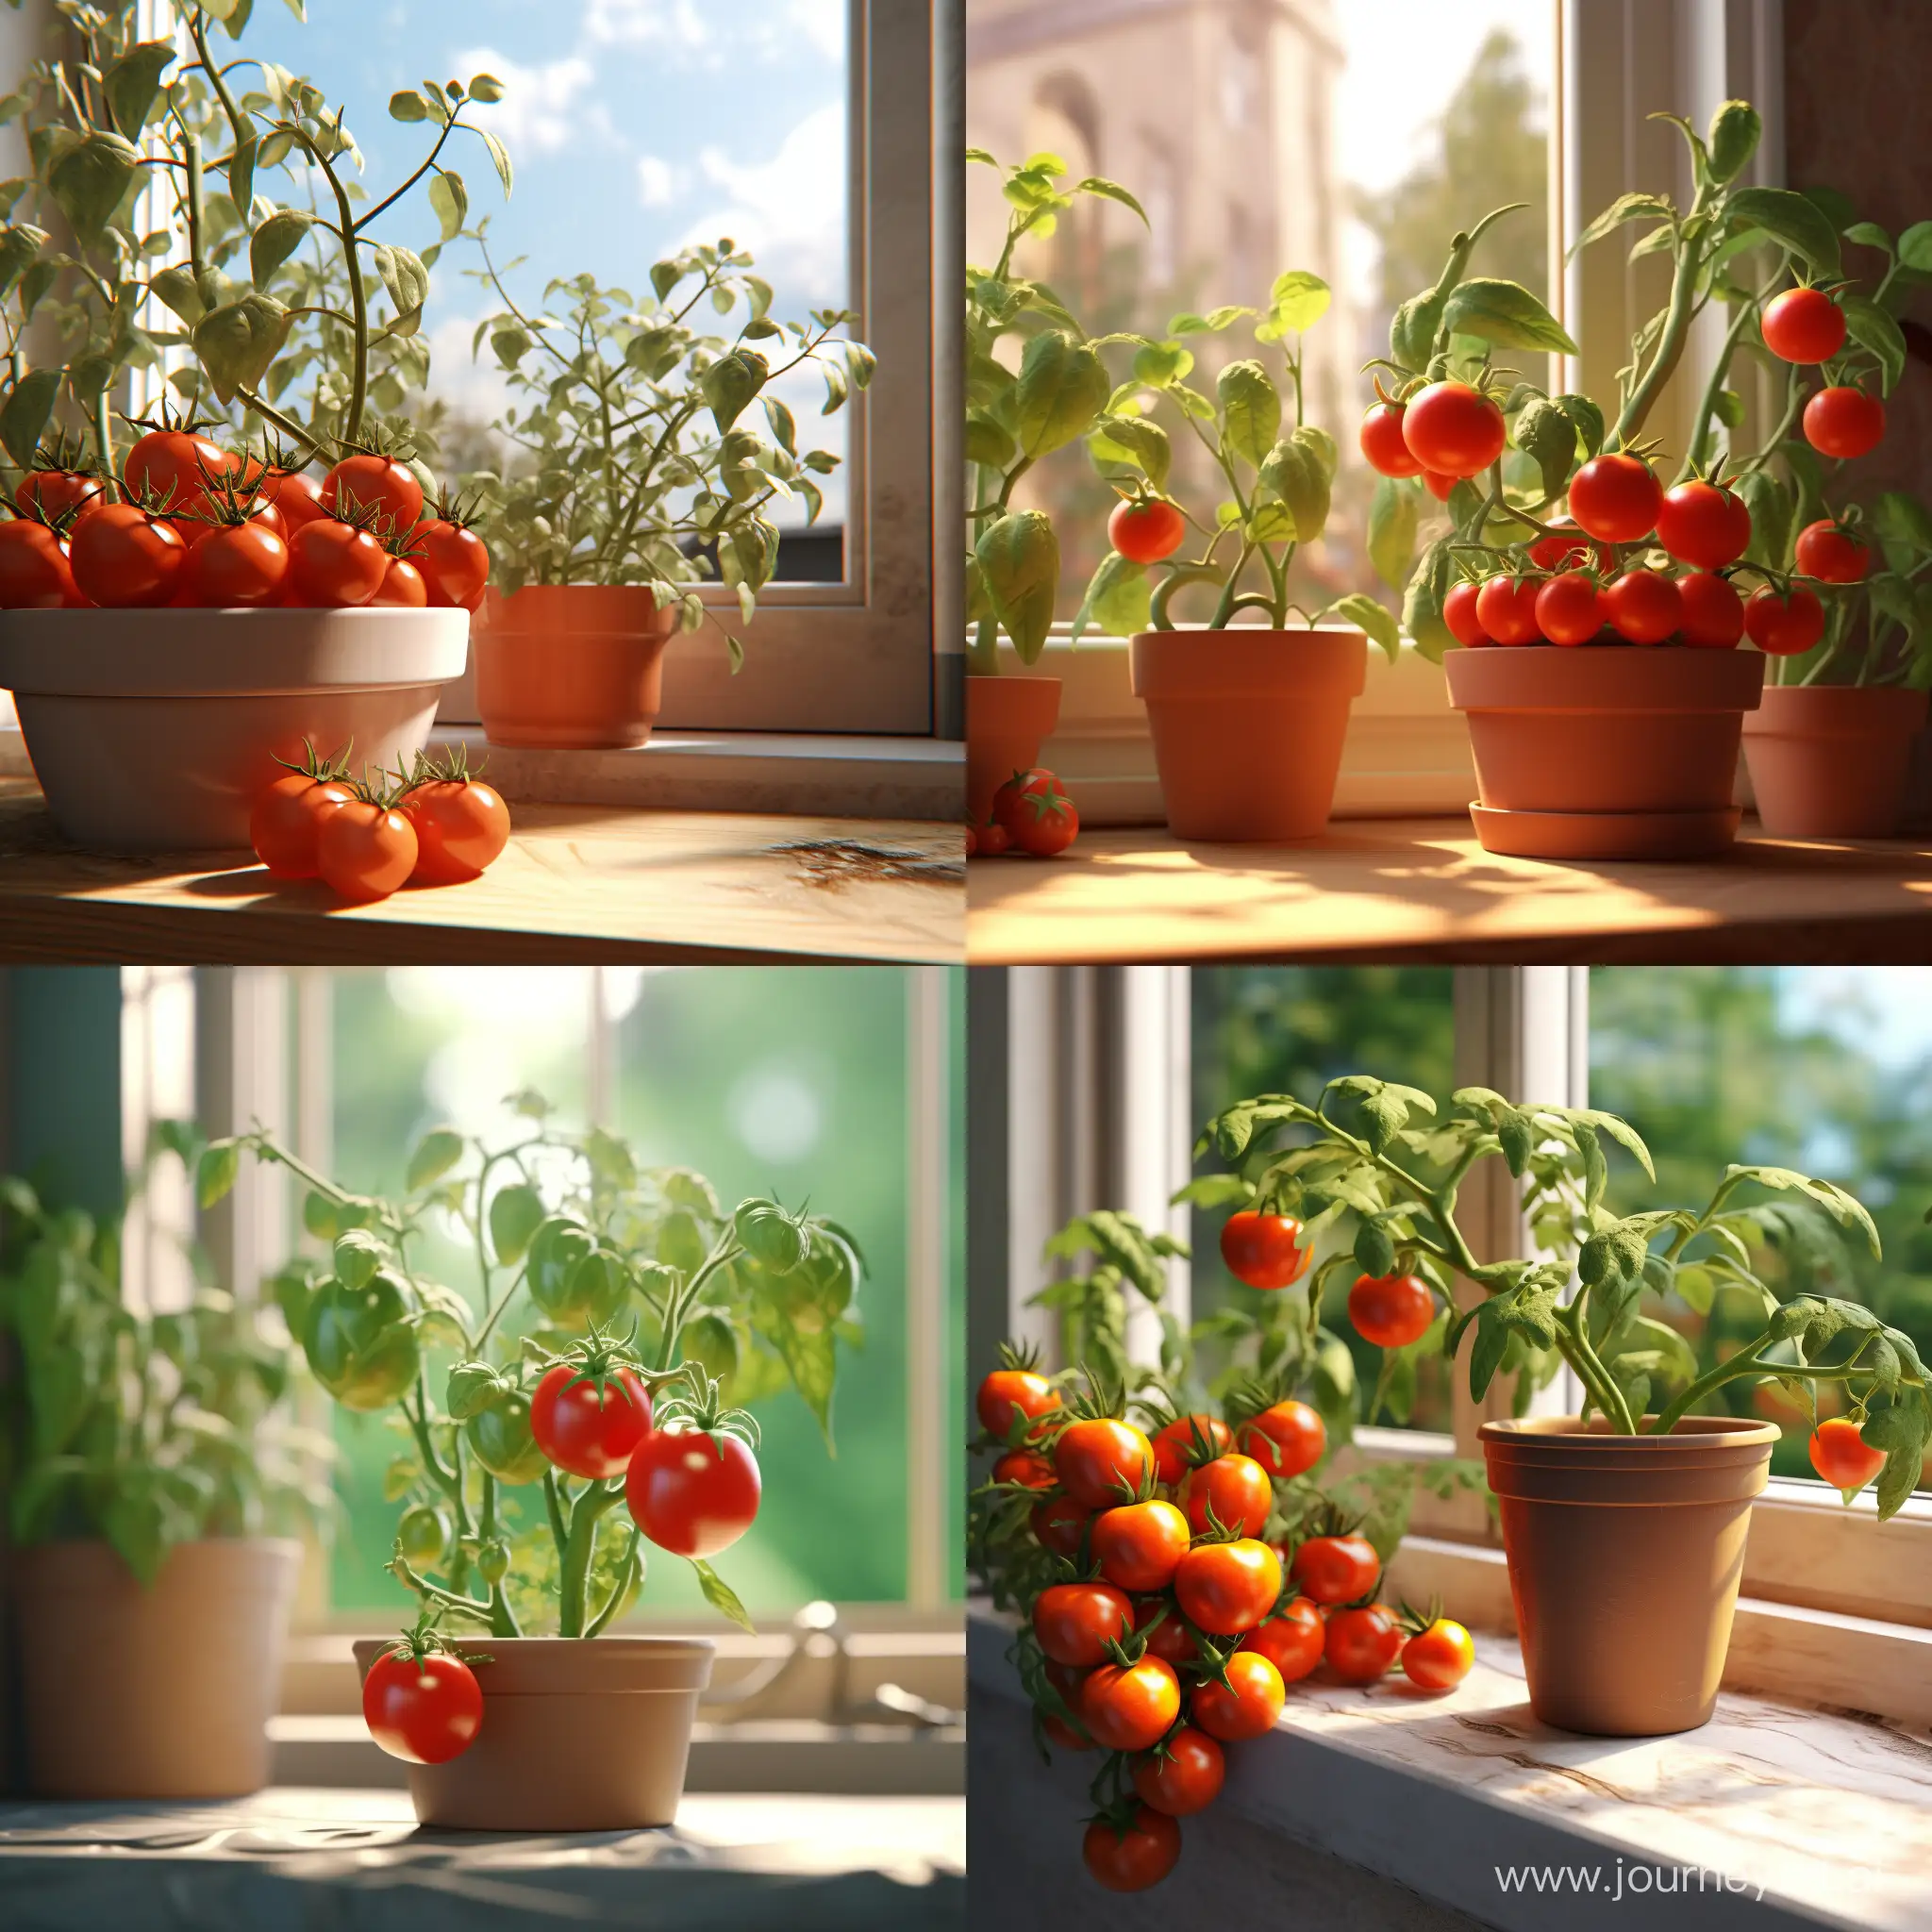 Vibrant-3D-Animation-of-Tomatoes-Thriving-in-Window-Sill-Pot